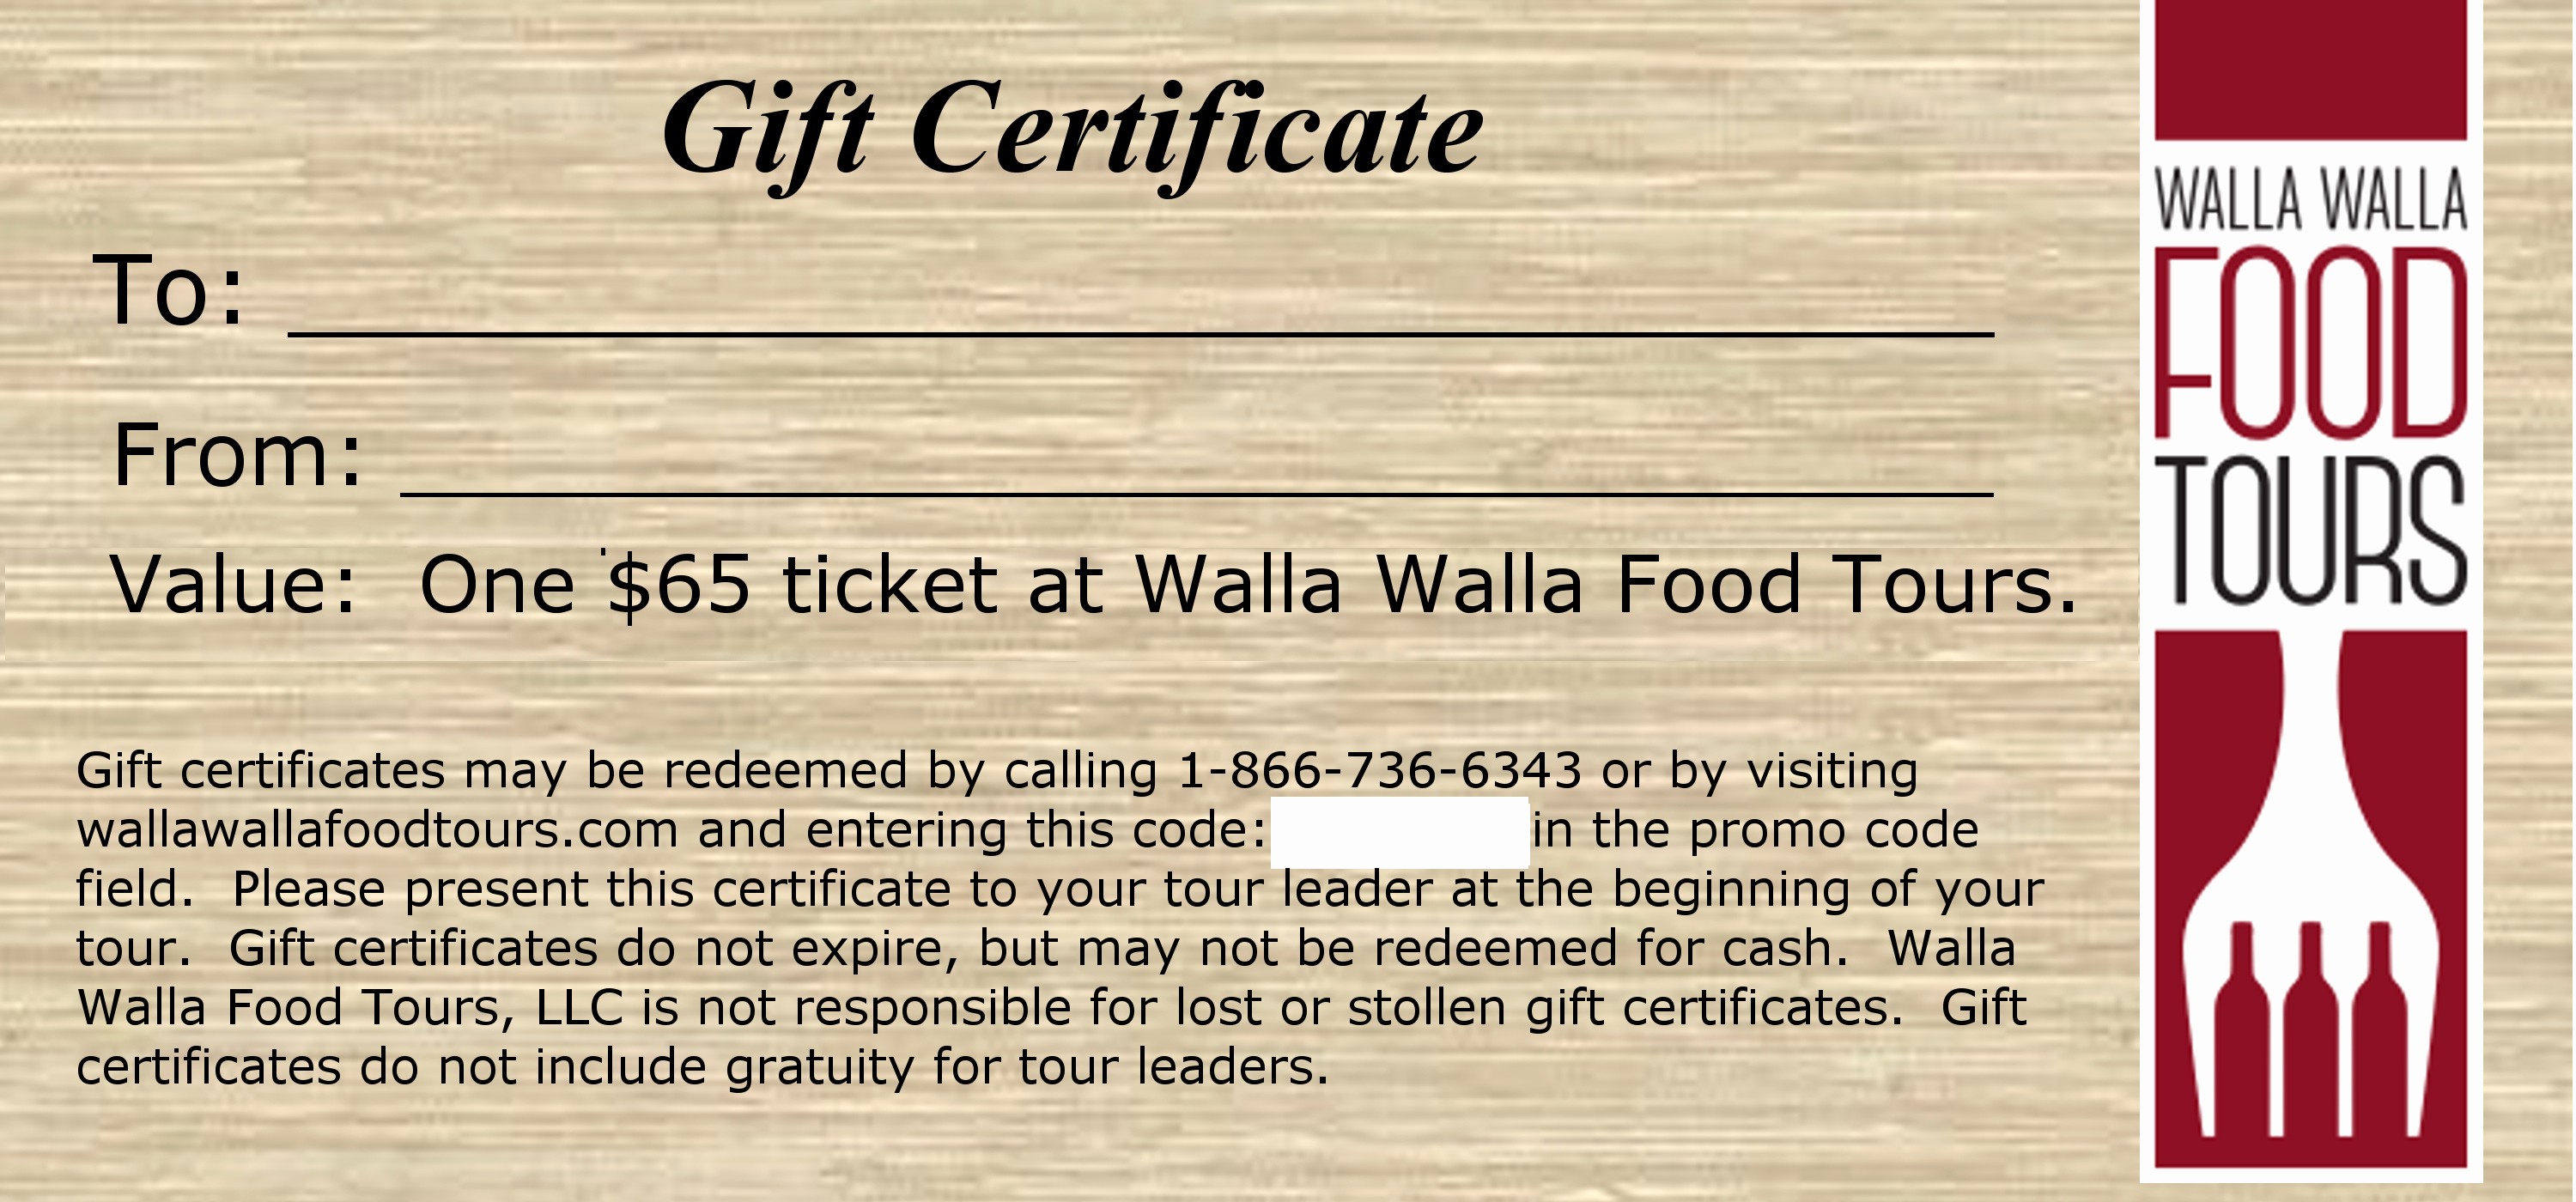 How to Make Gift Certificate Luxury Gift Certificates Walla Walla Food tours